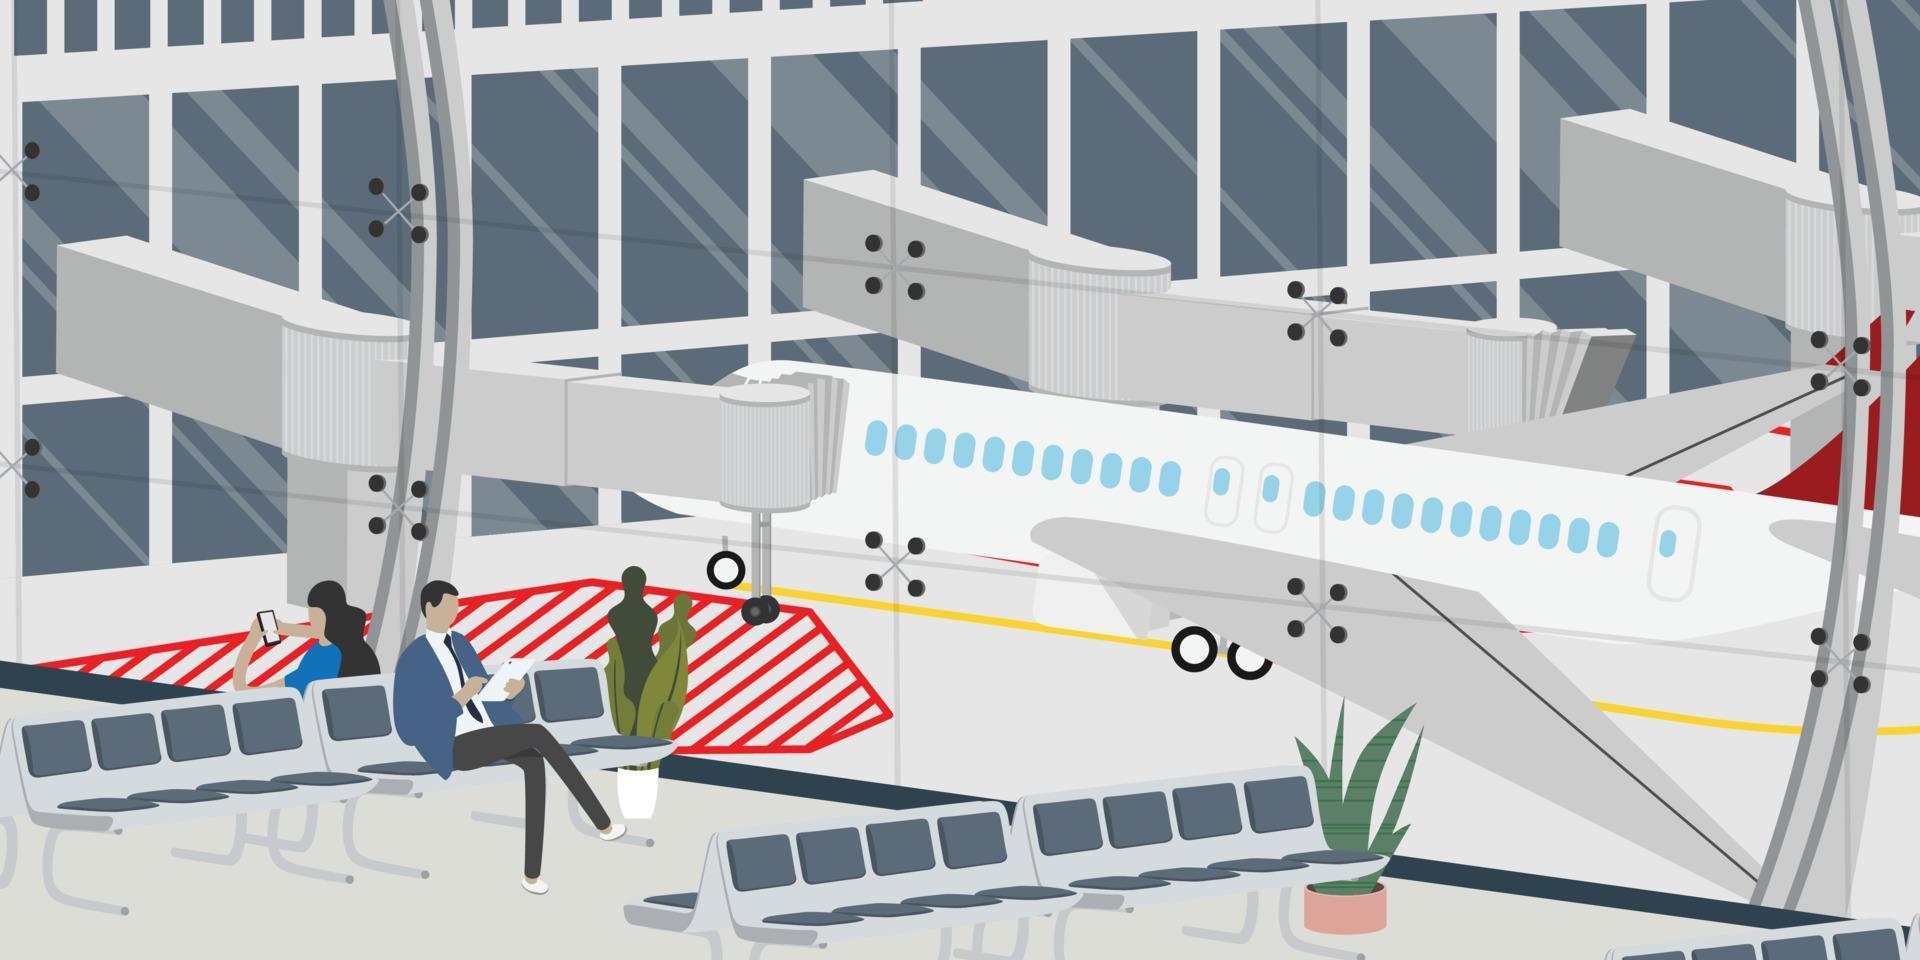 Airport departure area  tourists with luggage waiting relaxing in departure hall terminal for boarding plane departure, travelers aircraft vector illustration